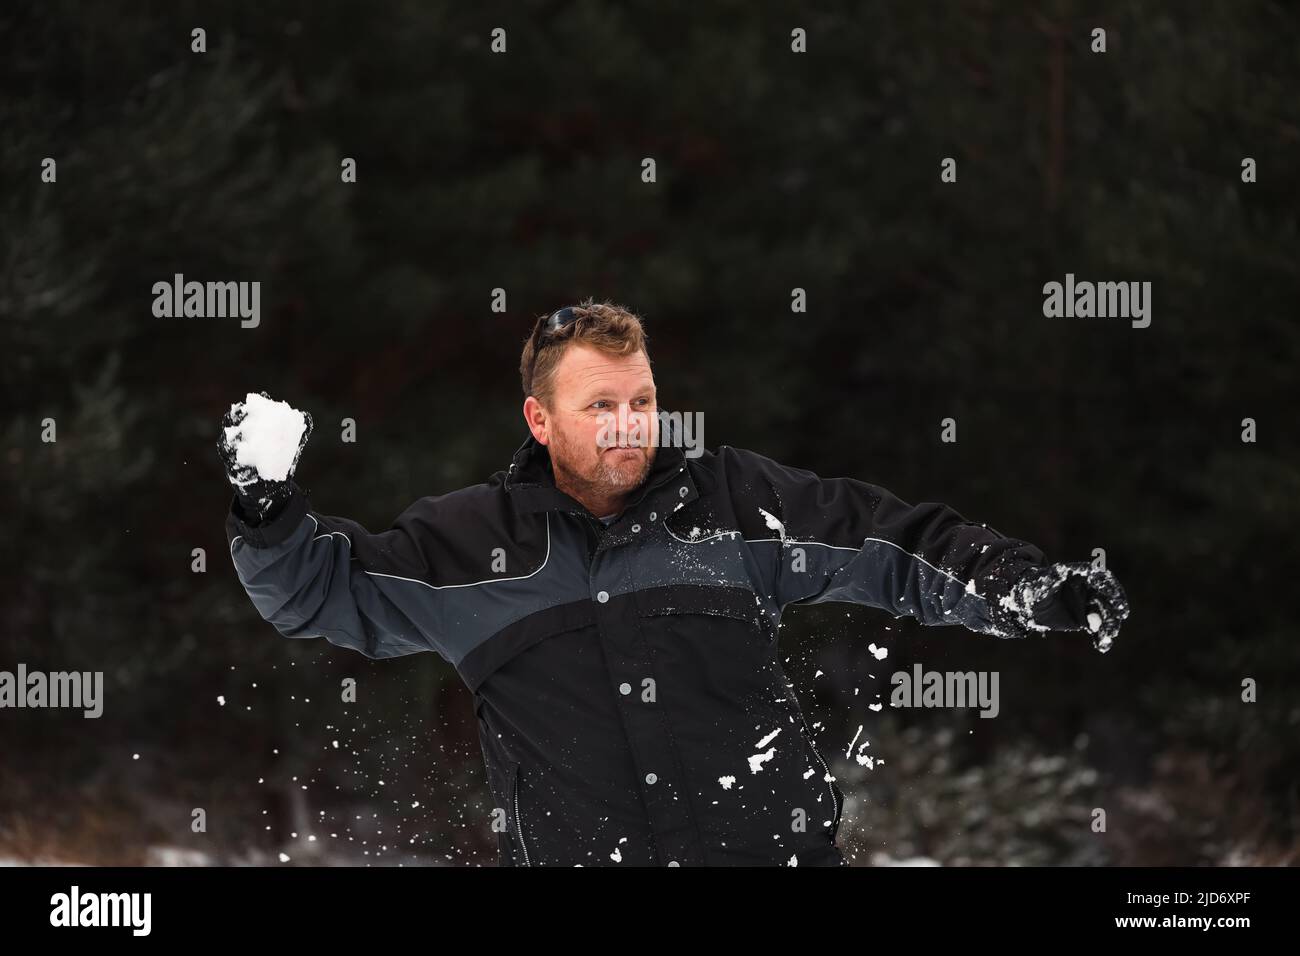 Adult man playing in winter snowball fight Stock Photo